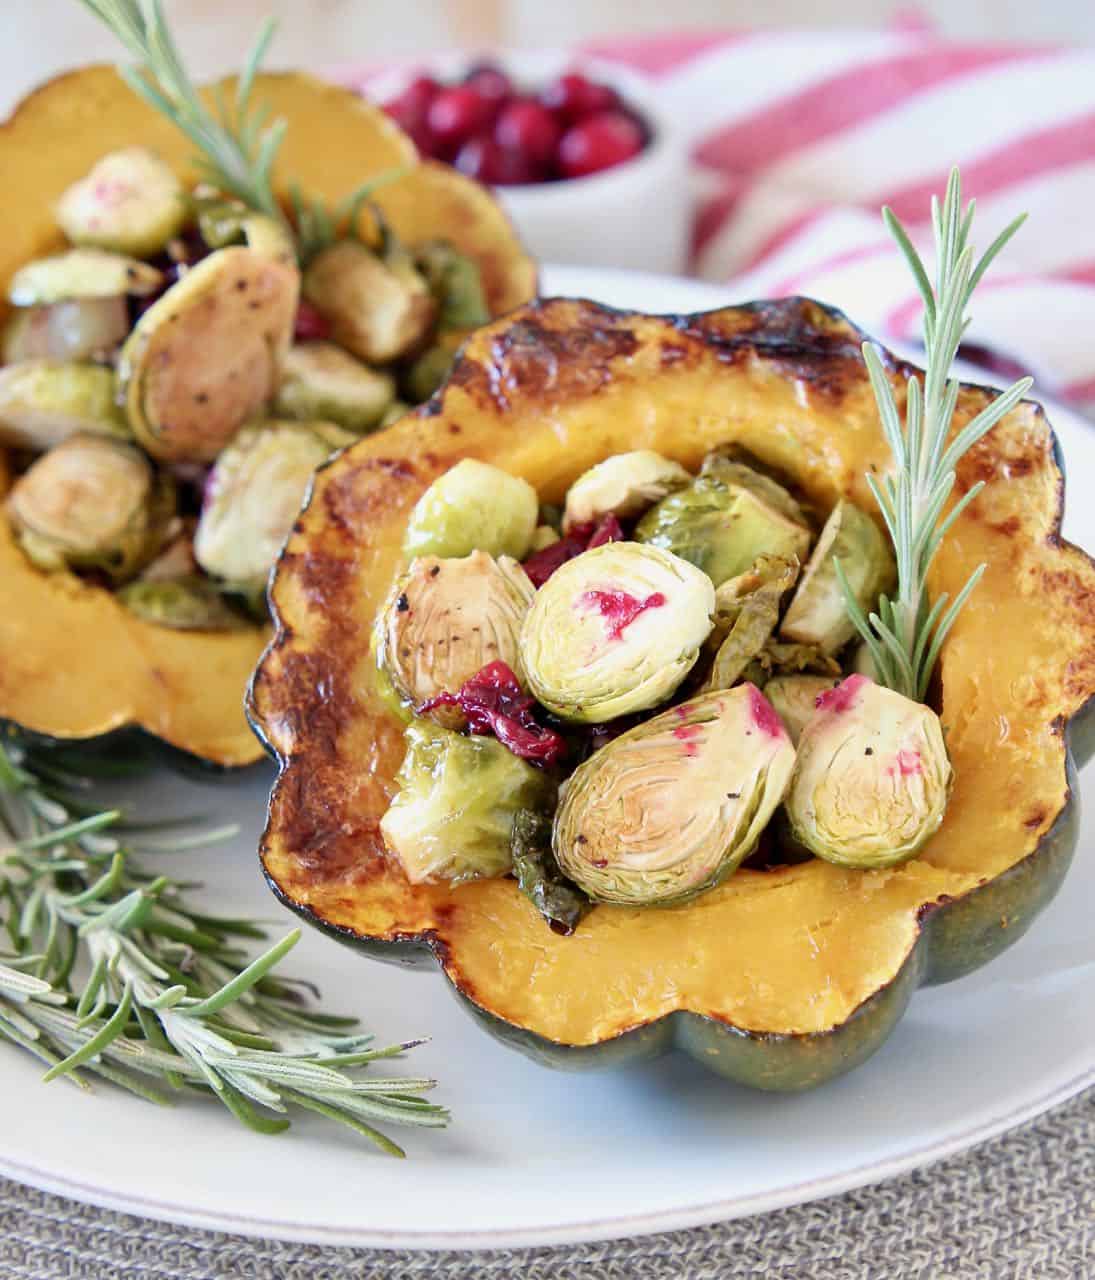 Stuffed acorn squash halves on plate filled with roasted brussels sprouts and cranberries